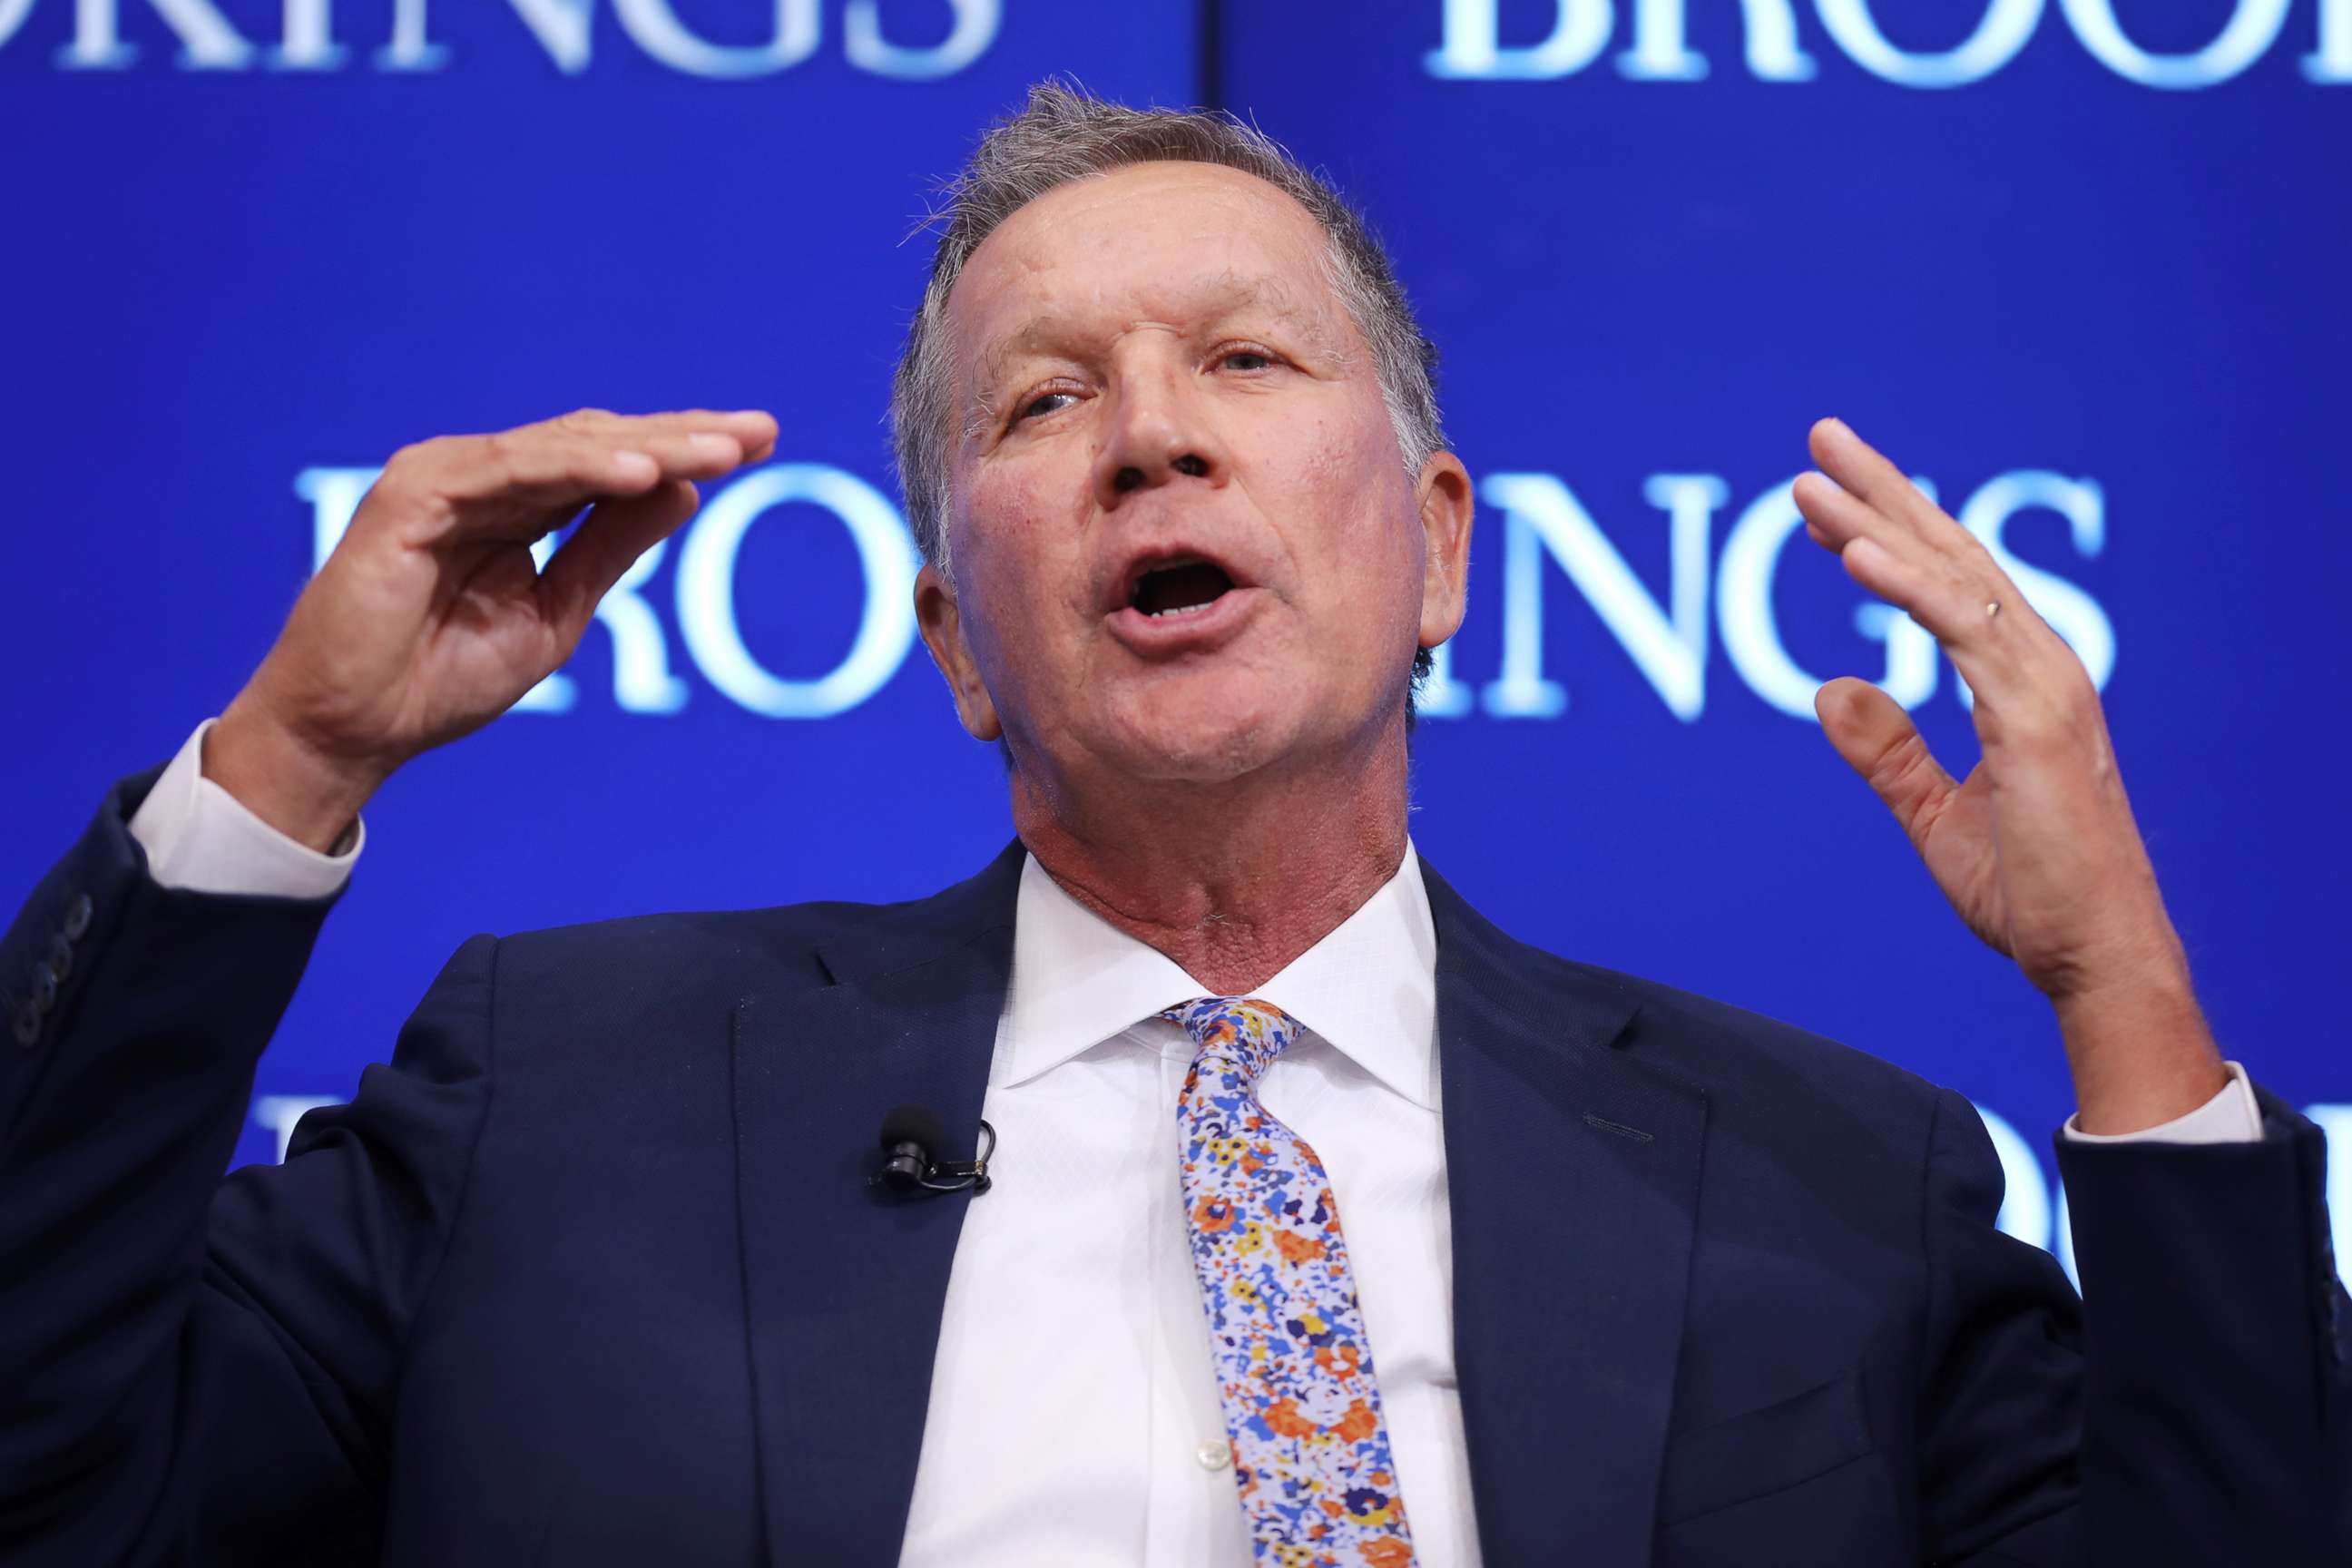 PHOTO: Gov. John Kasich participates in a Brookings Institution event on Oct. 10, 2018 in Washington.